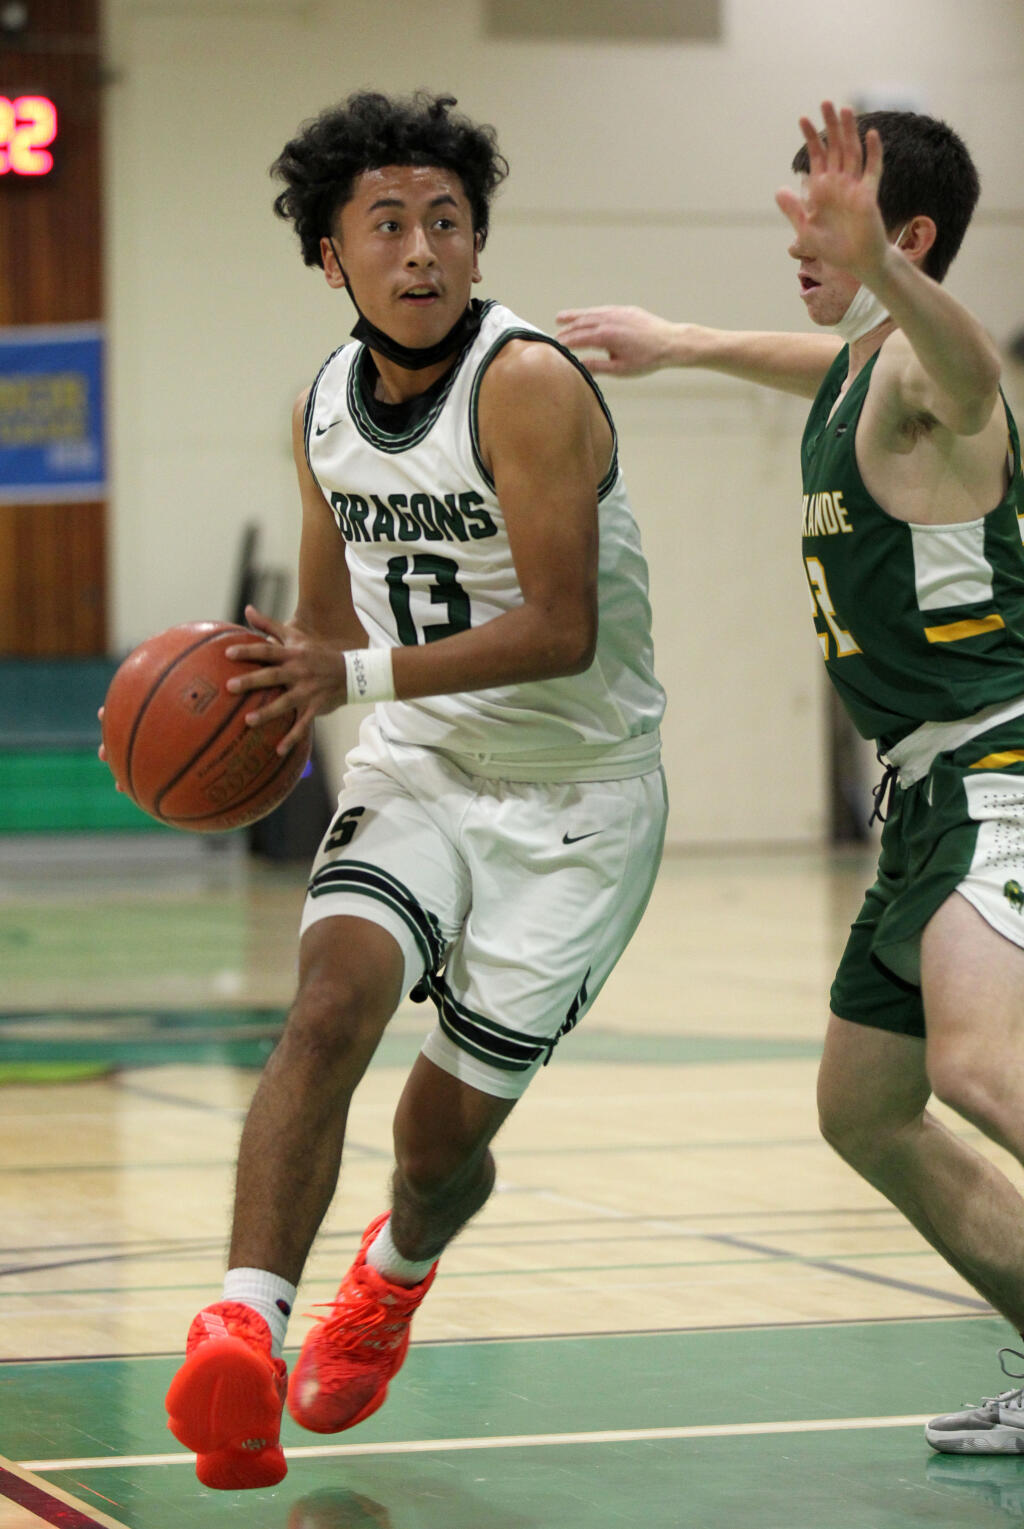 Sonoma Valley's JC Olvera (13) drives against Casa Grande in the first half of basketball at Sonoma Valley High School on Thursday, January 20, 2022. (Photo by Darryl Bush / For The Press Democrat)